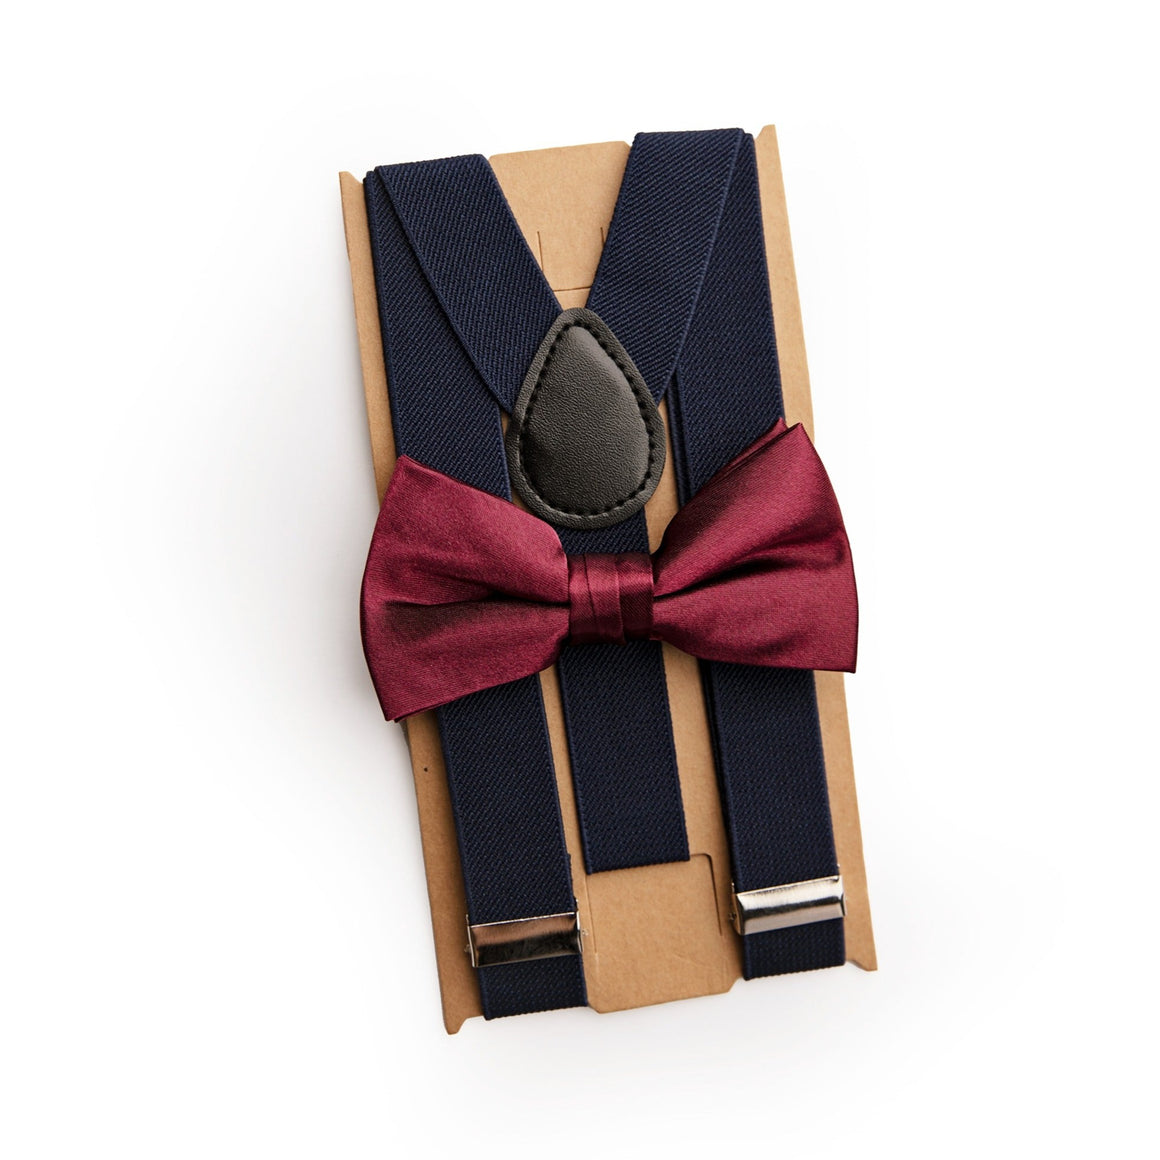 Burgundy Satin Bow Tie Navy Suspenders - Infant To Adult Sizes